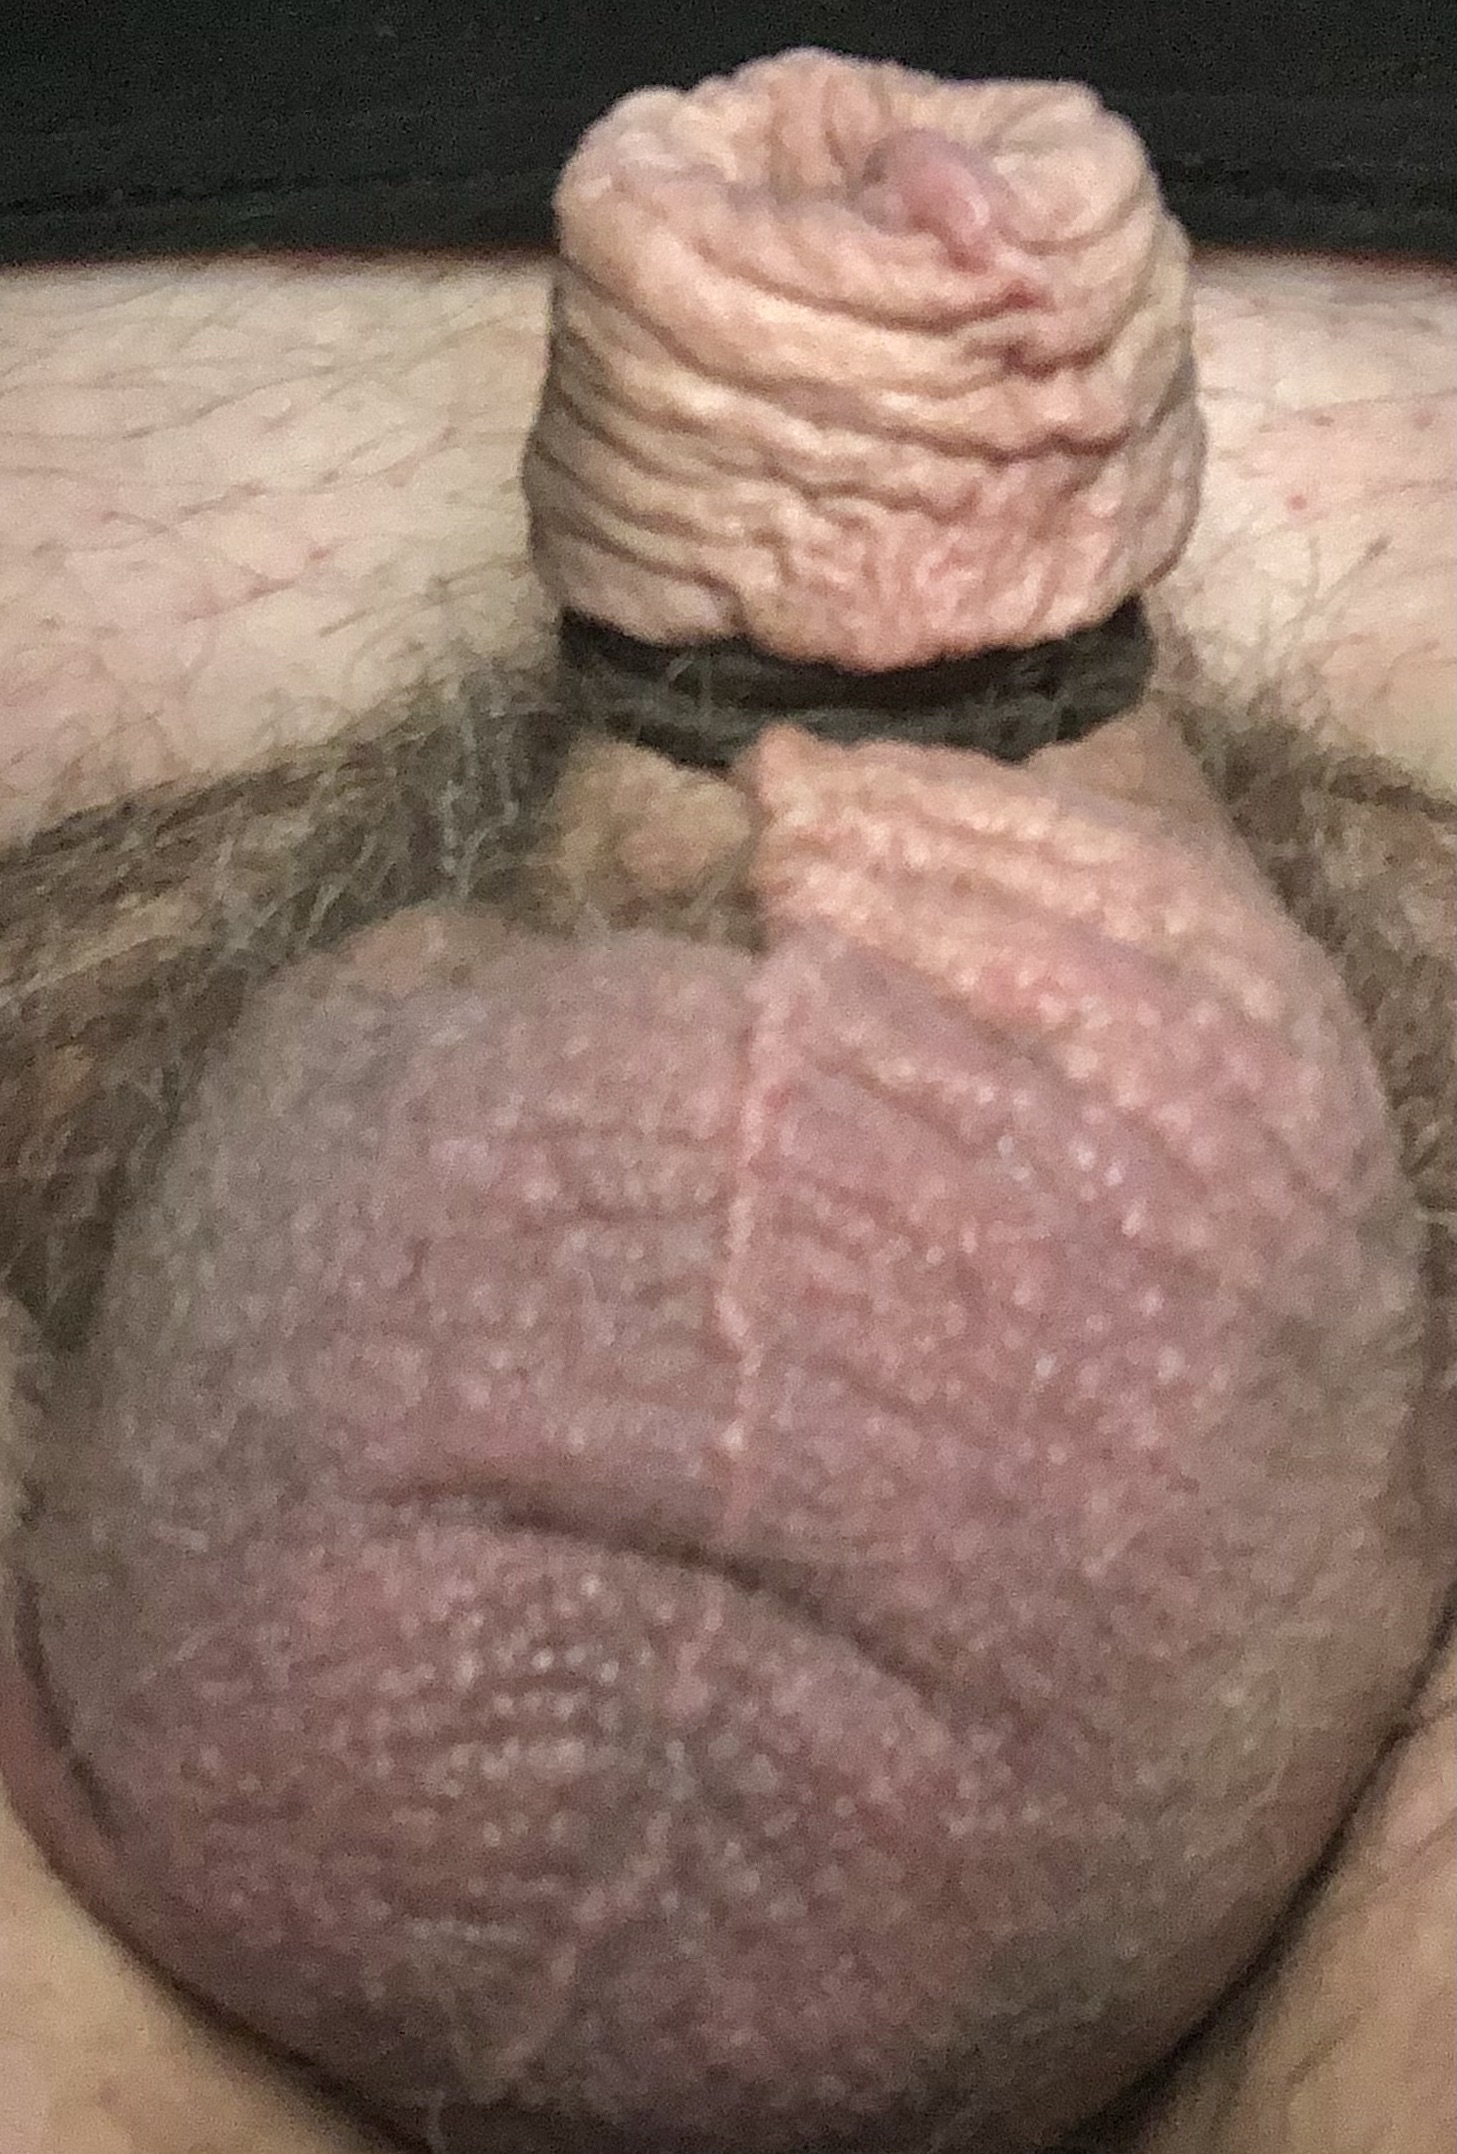 Micropenis missing Gland